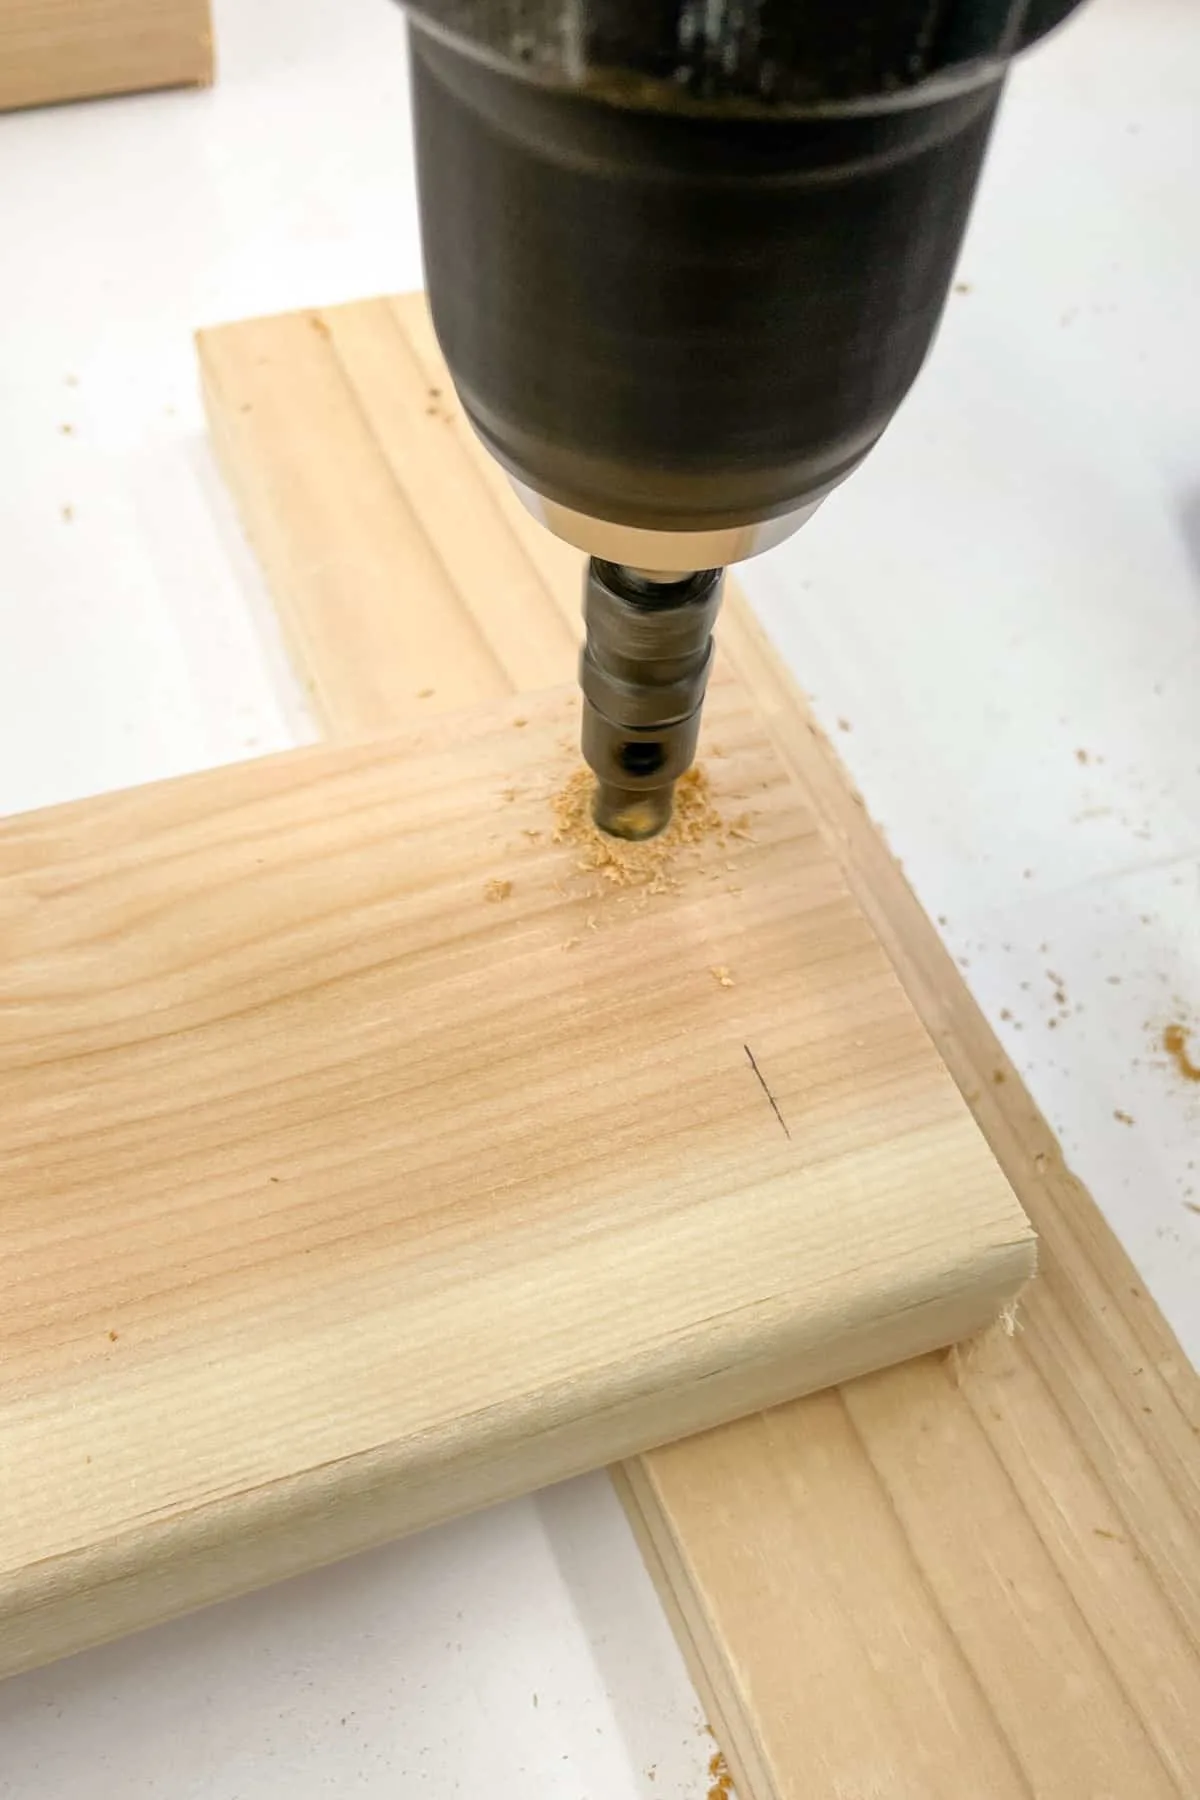 drilling a countersink hole in the ends of the plant shelf slats